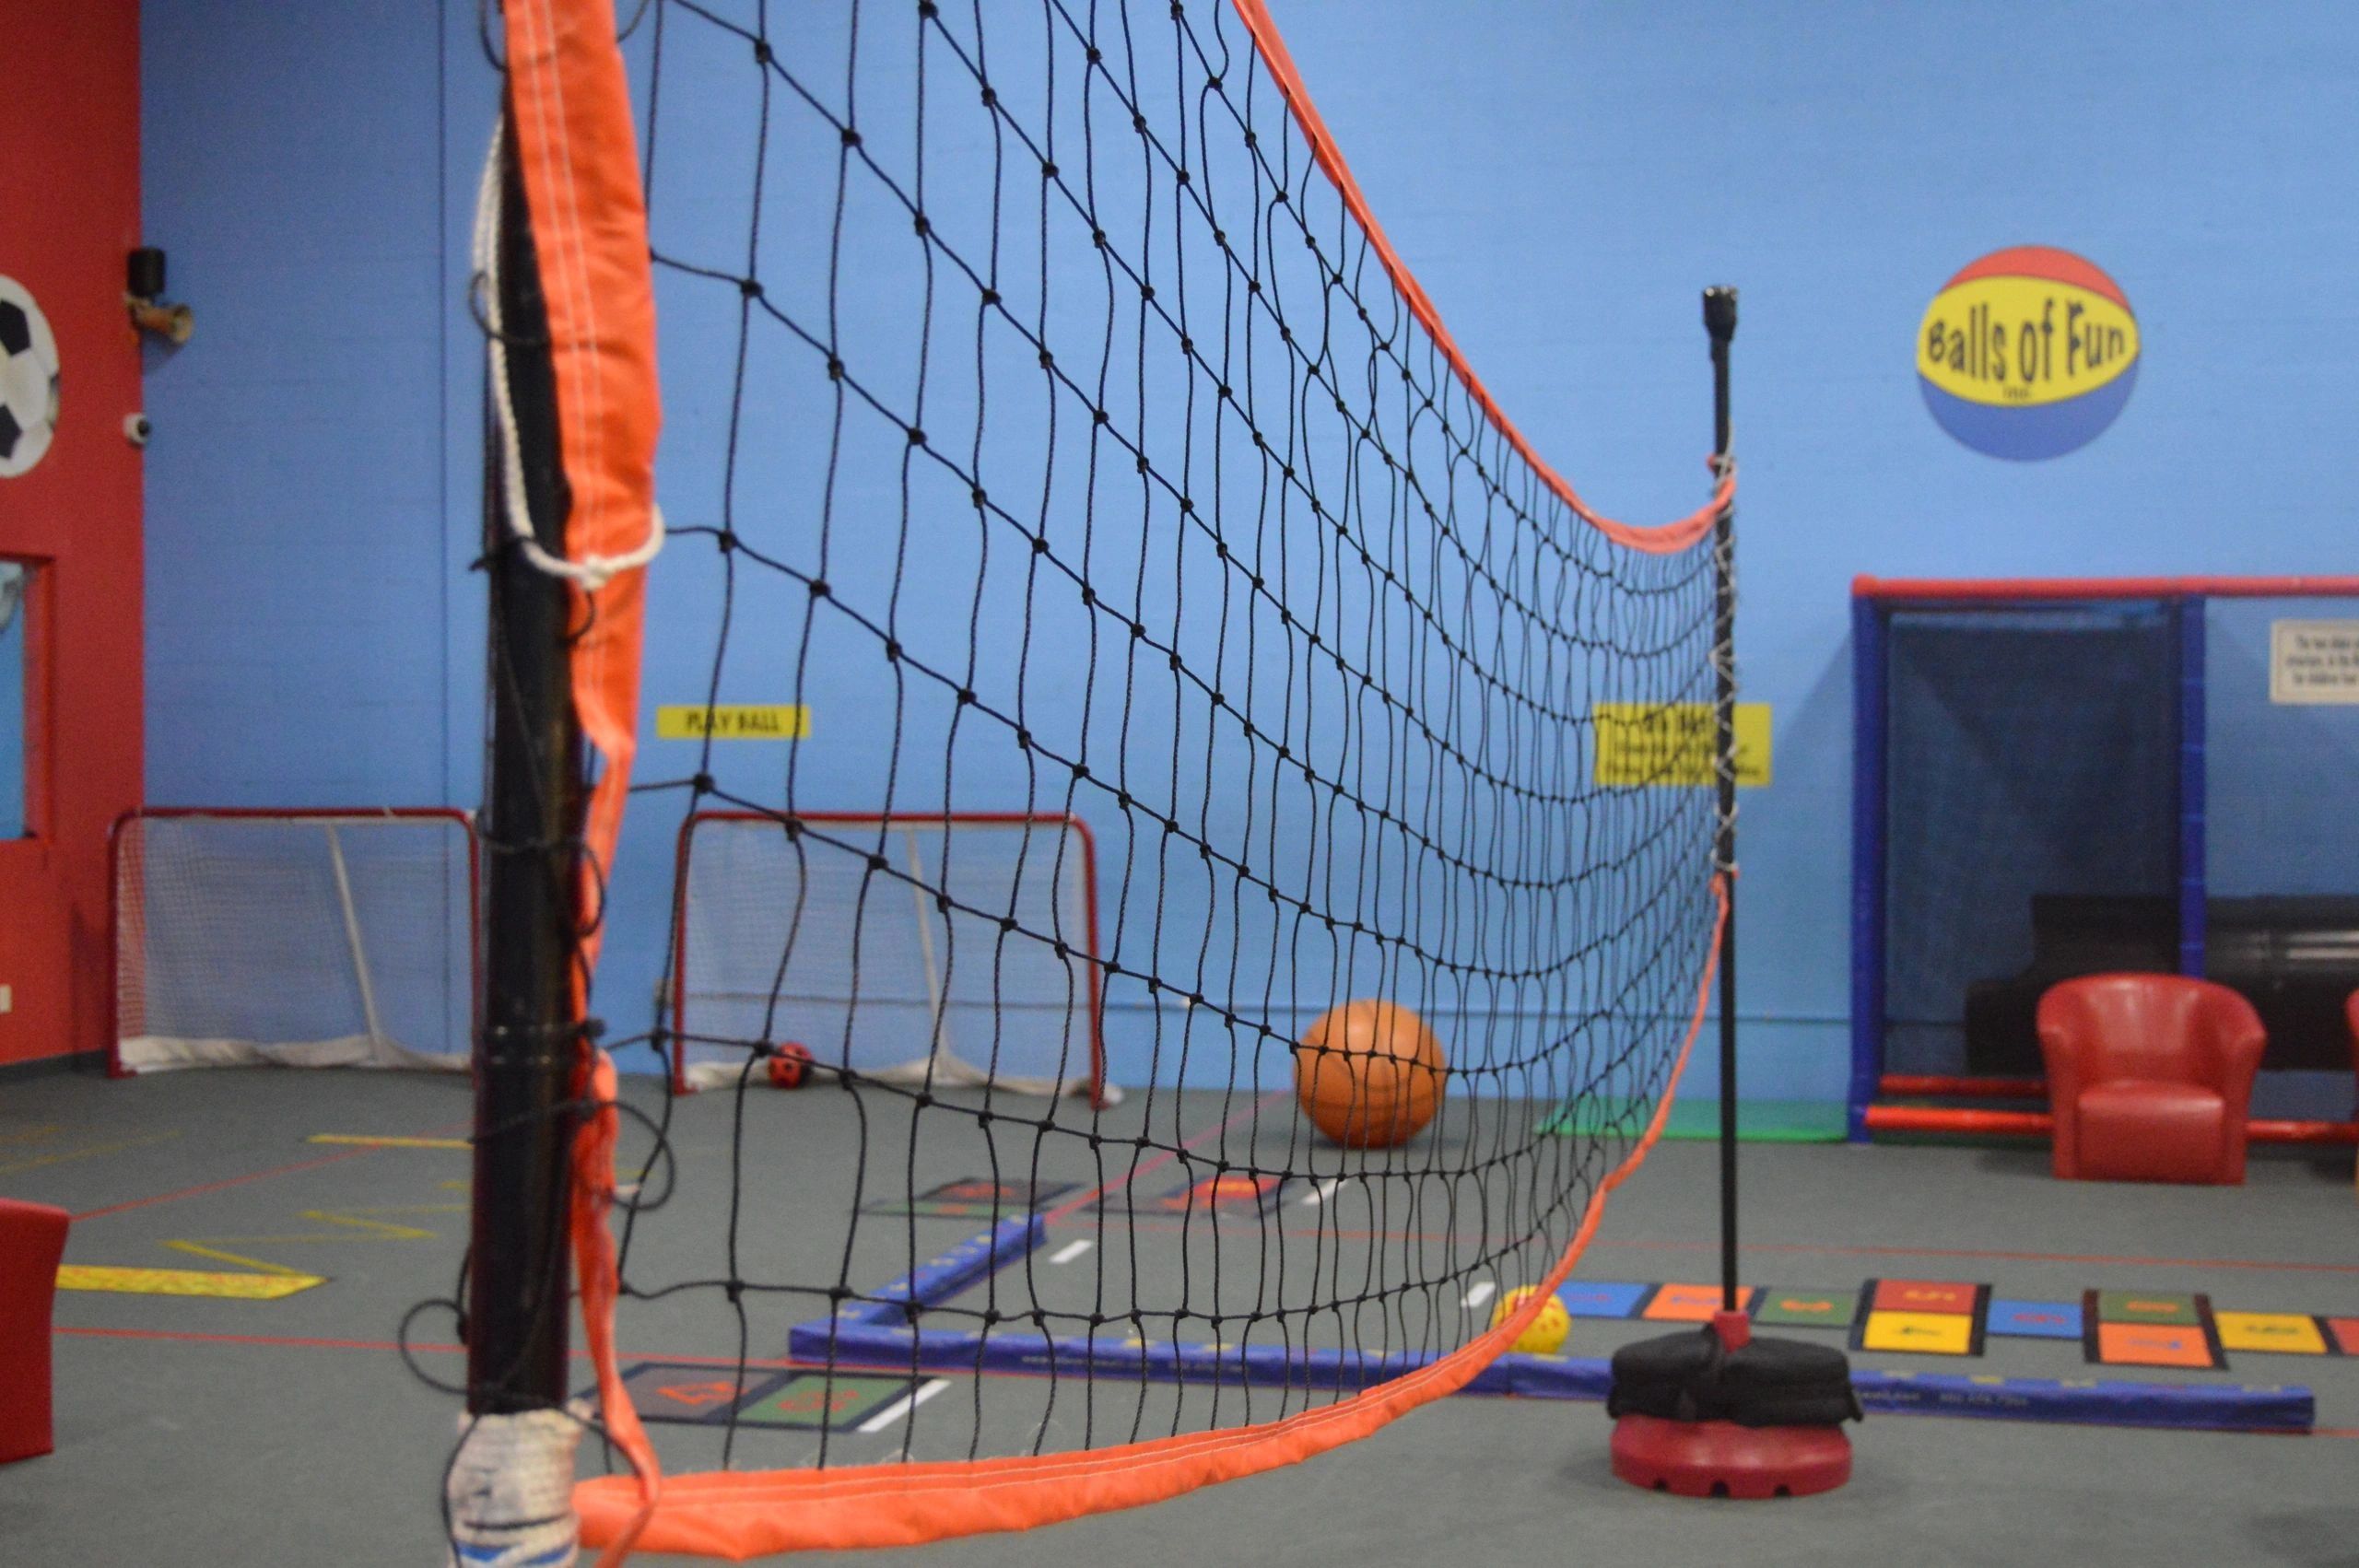 Balls of Fun sports nets and volley ball court